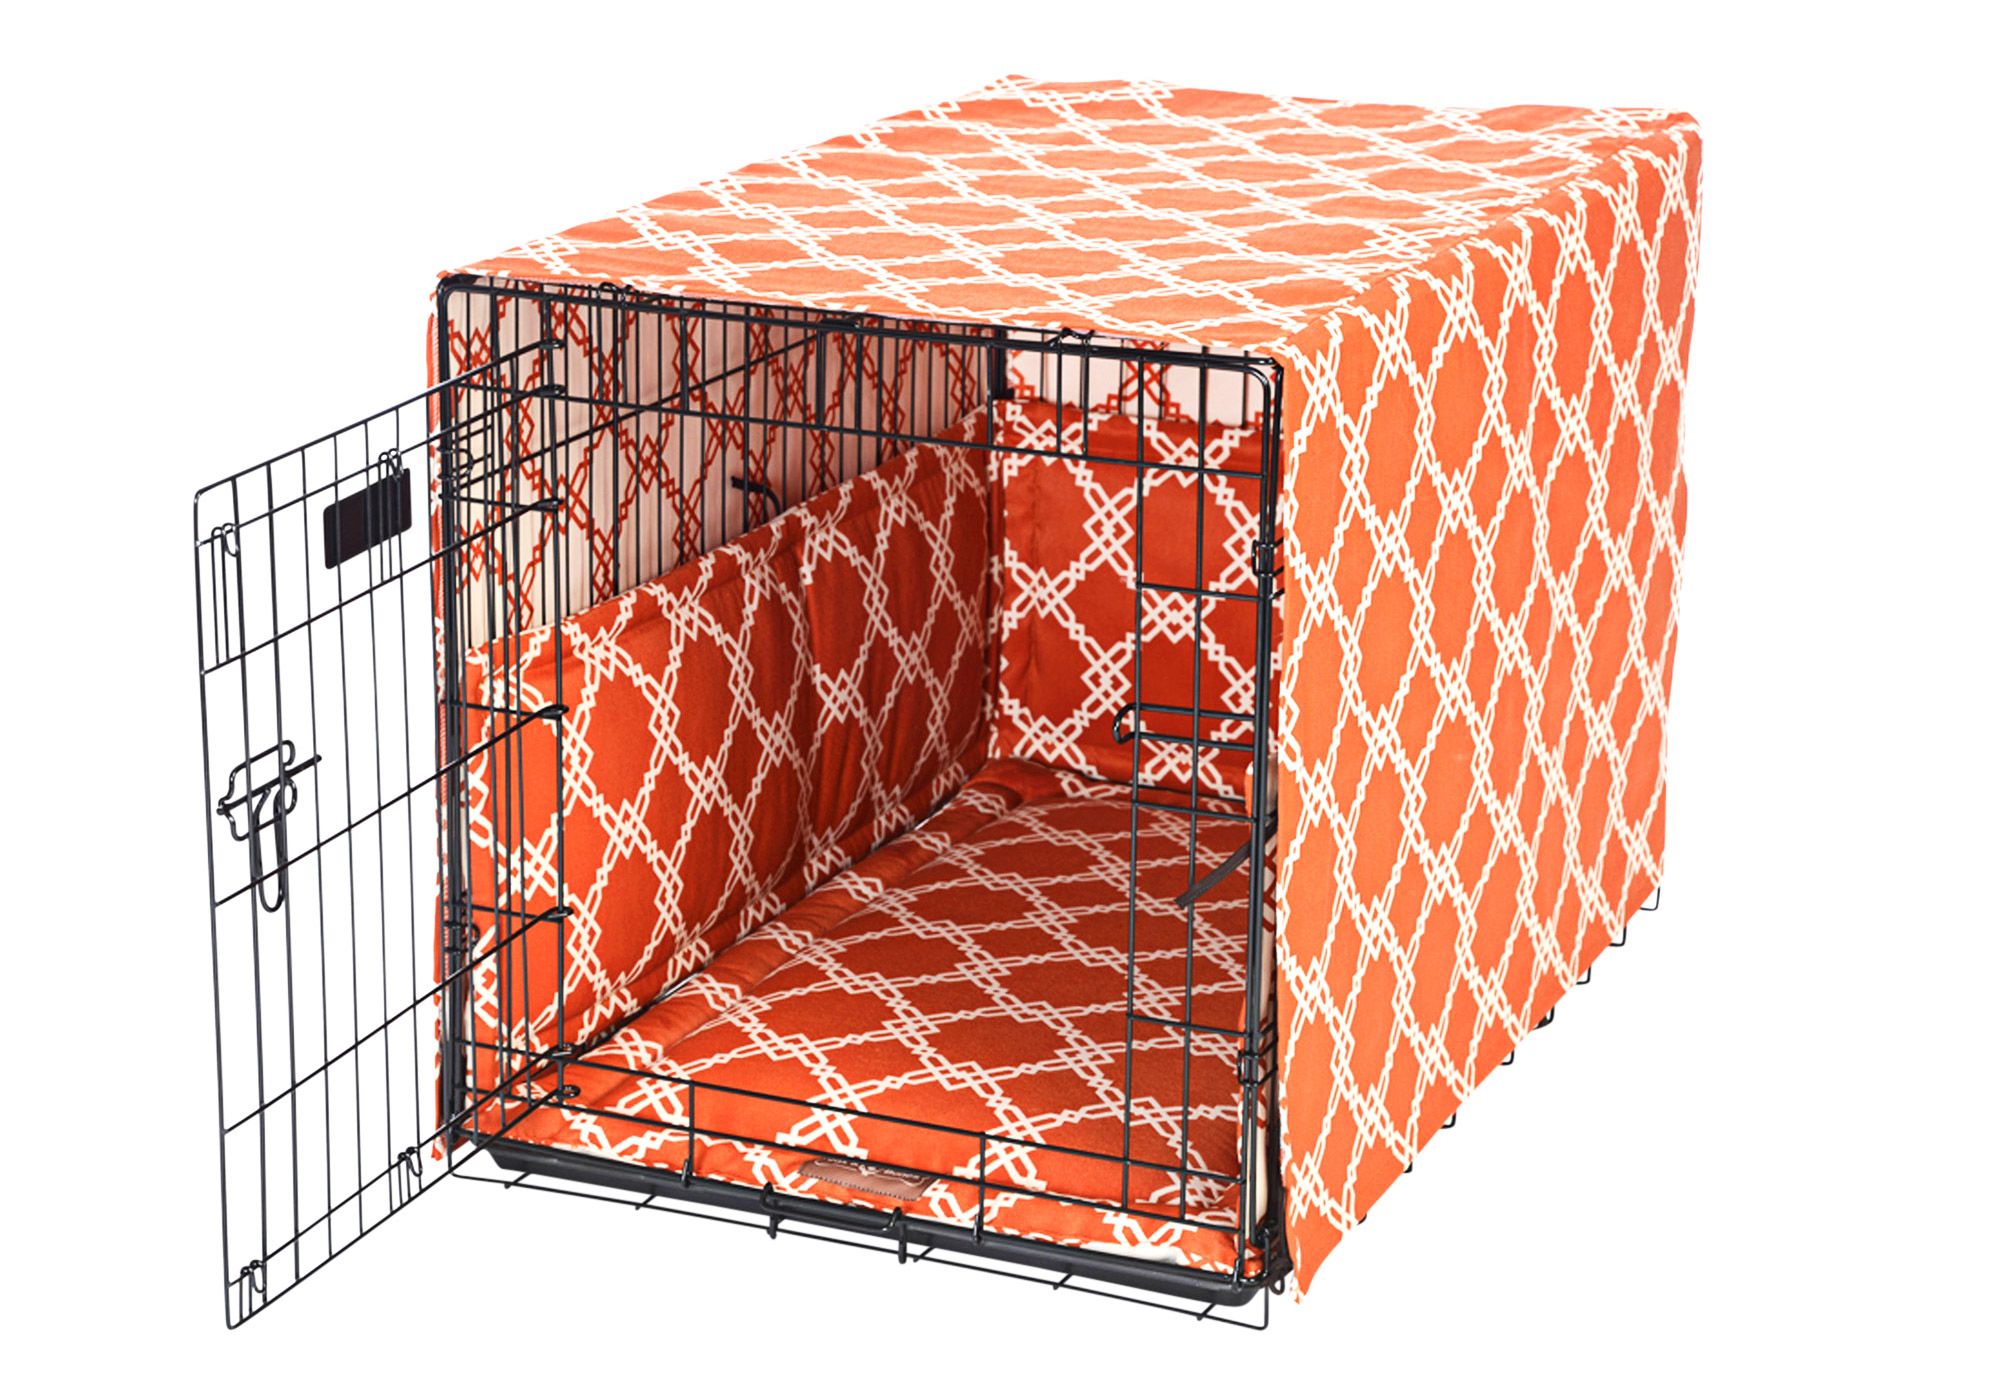 covering a dog's crate